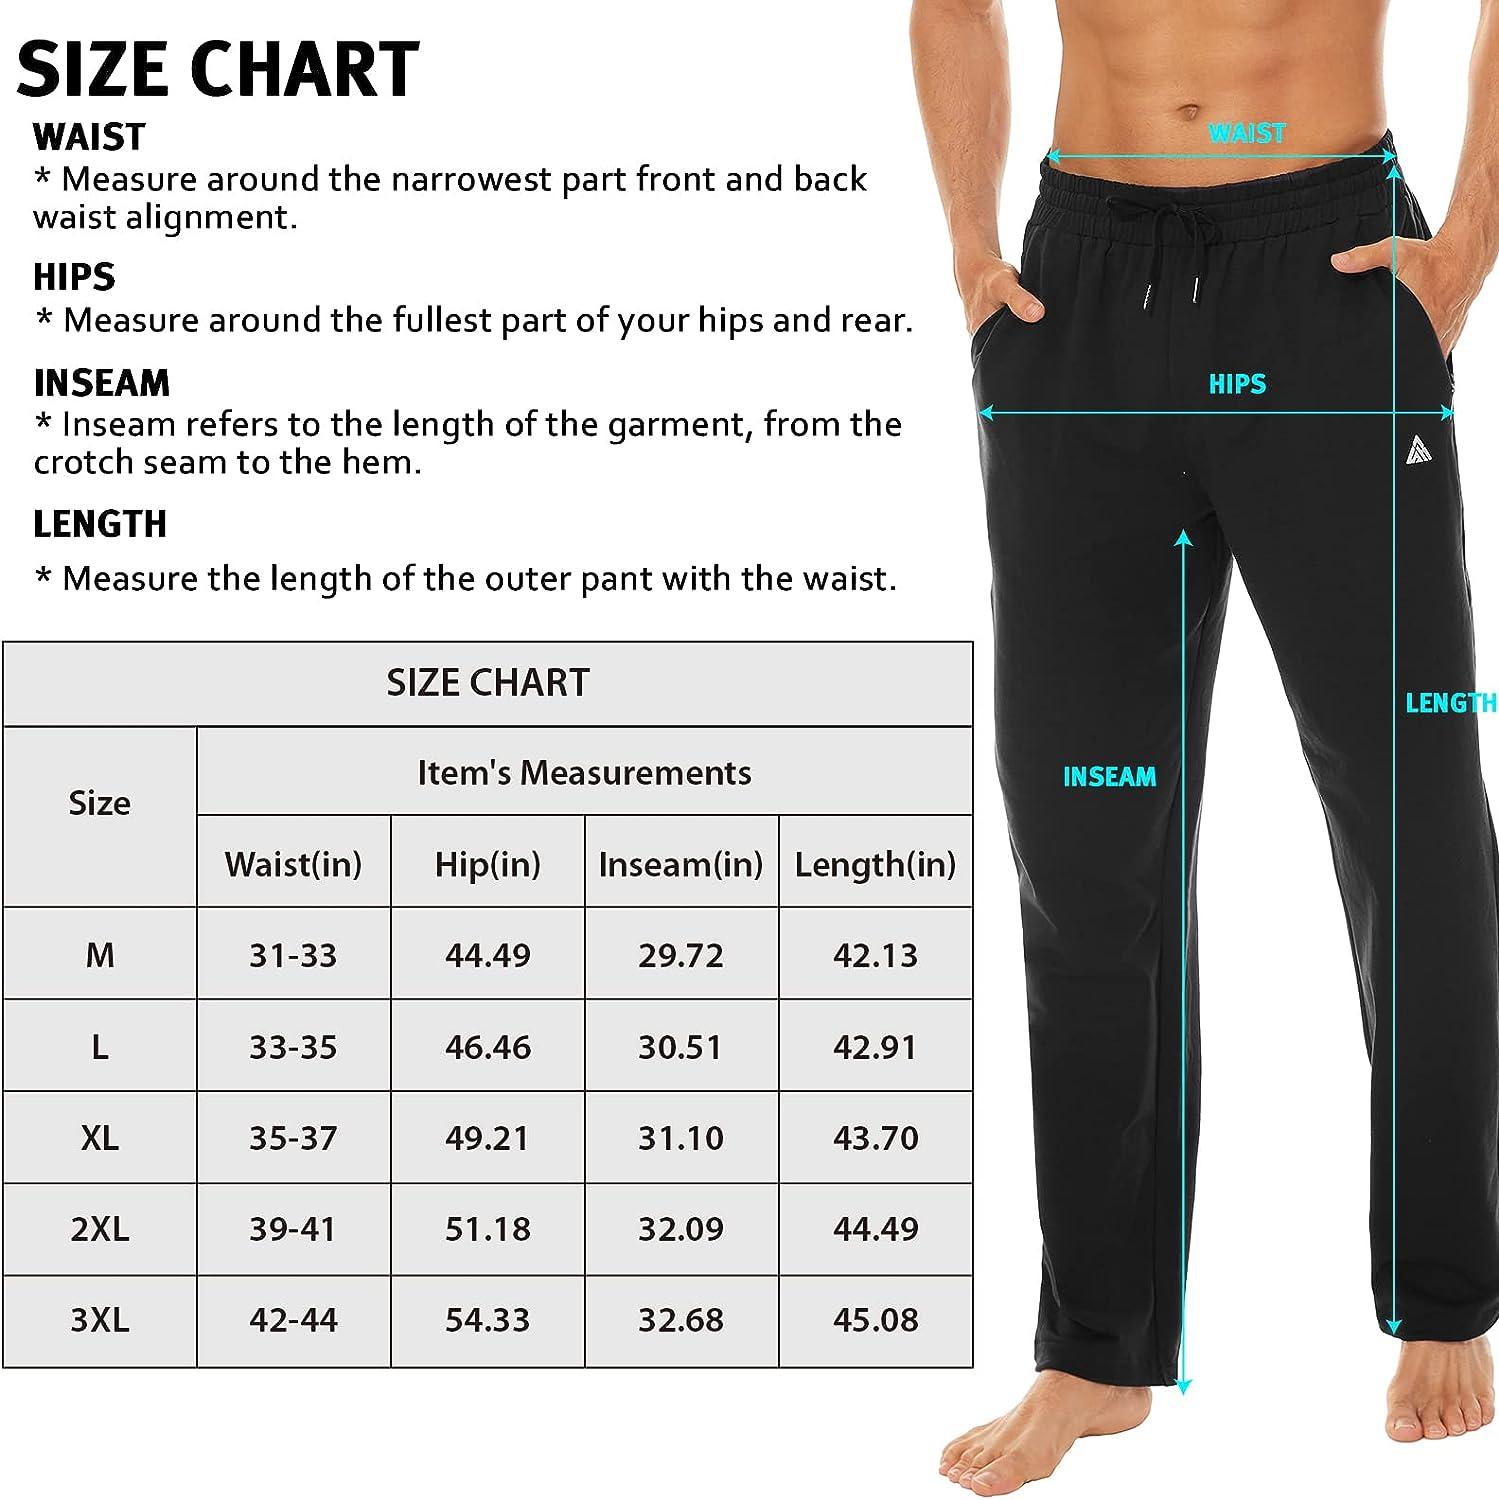 BIG MENS Open Bottom Sweatpants with POCKETS Comfortable Sizes 2XL